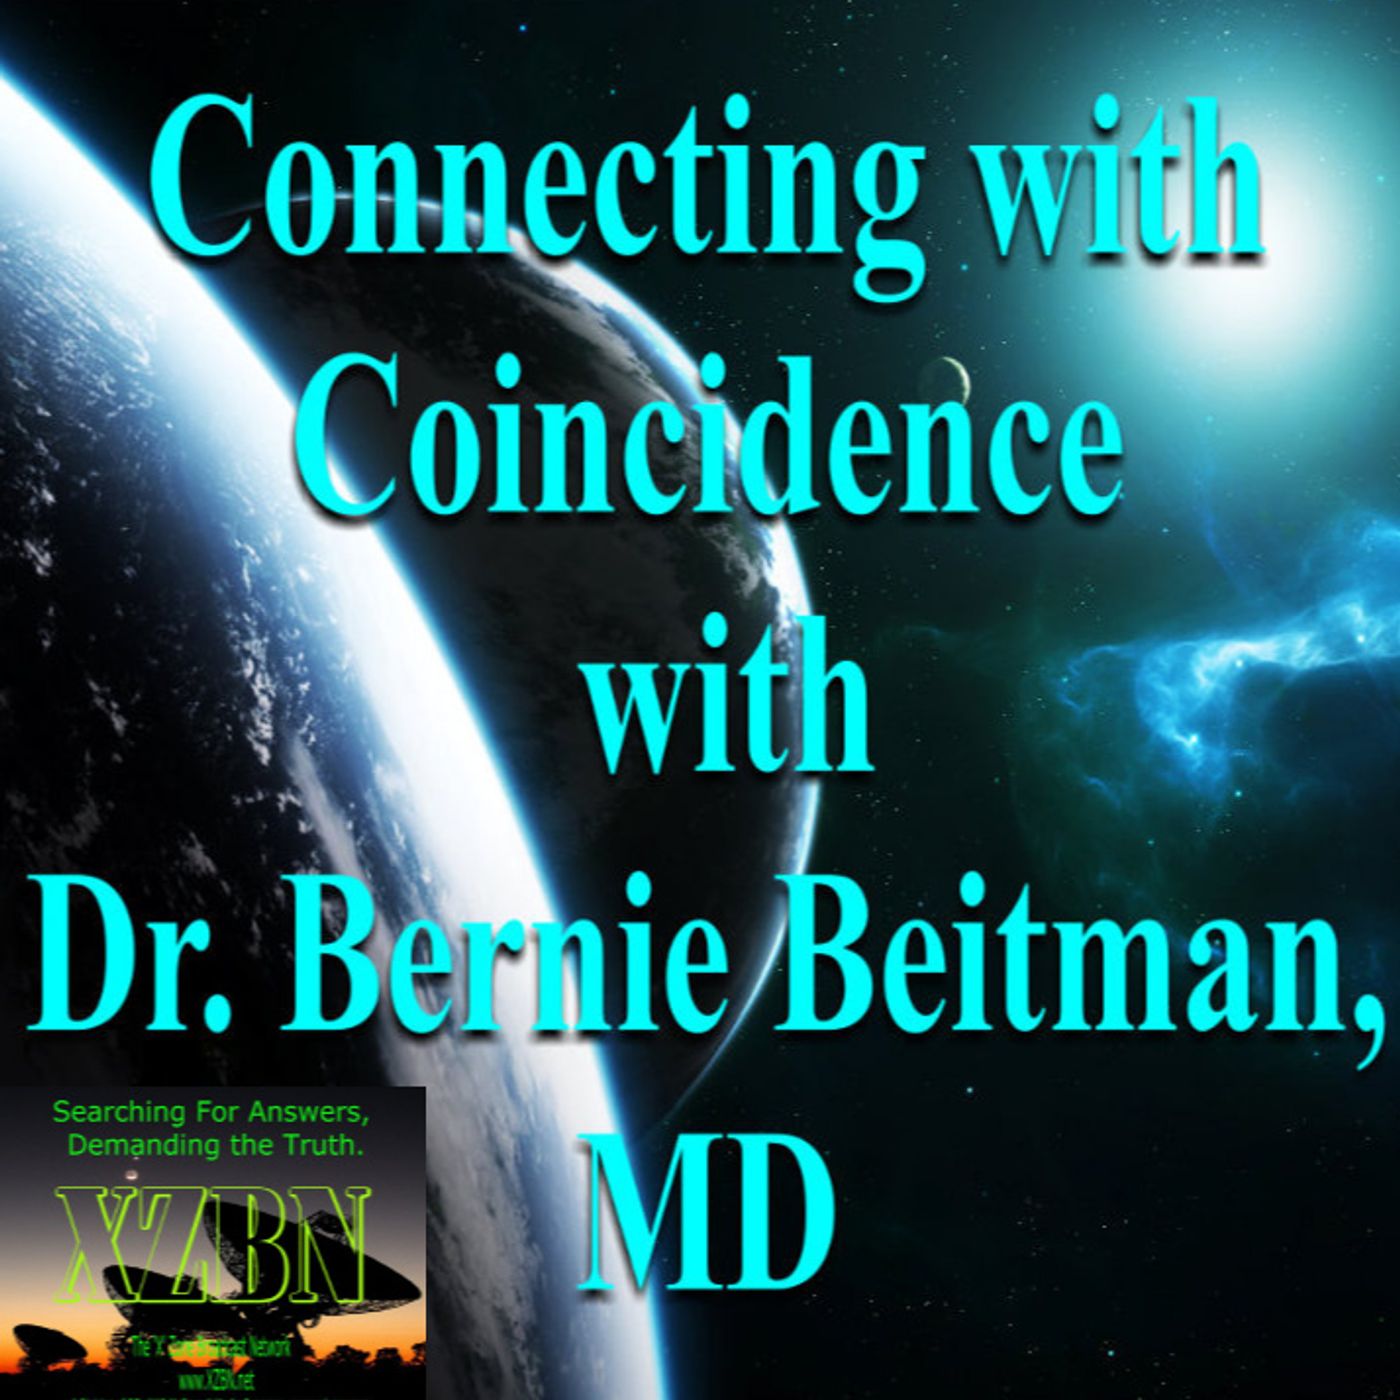 Connecting with Coincidence with Dr. Bernard Beitman, MD